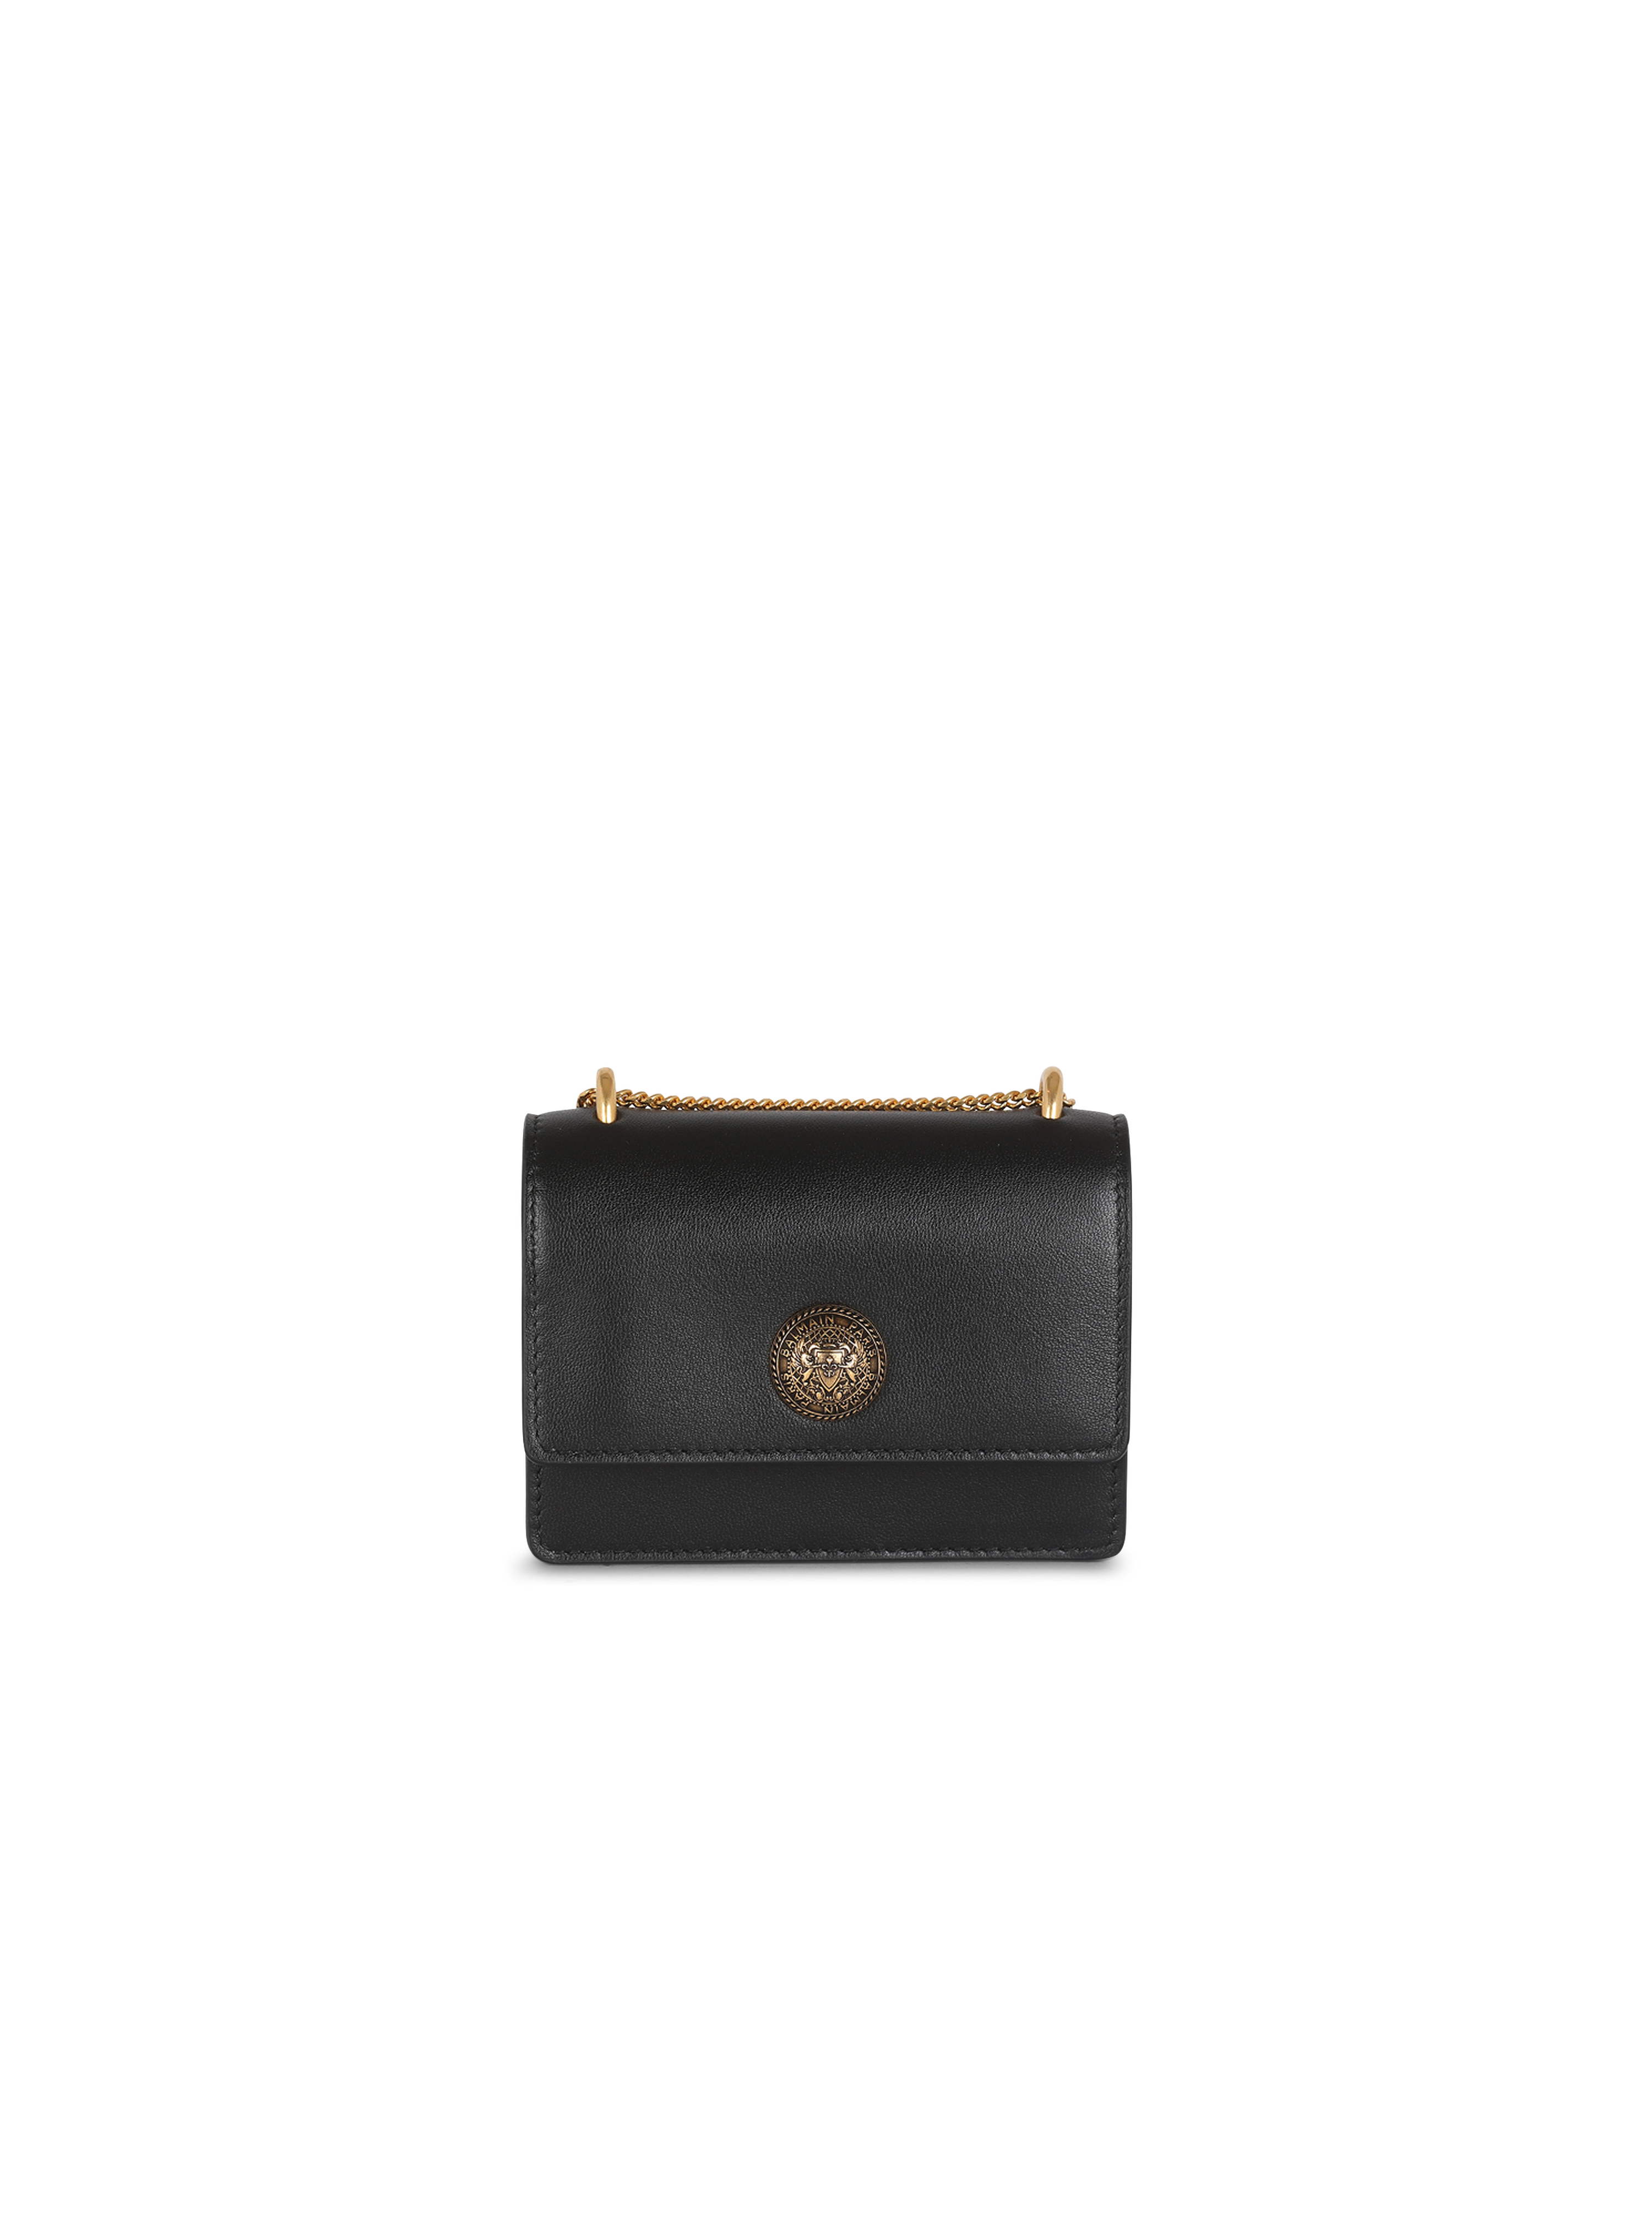 Small-sized leather Coin wallet, black